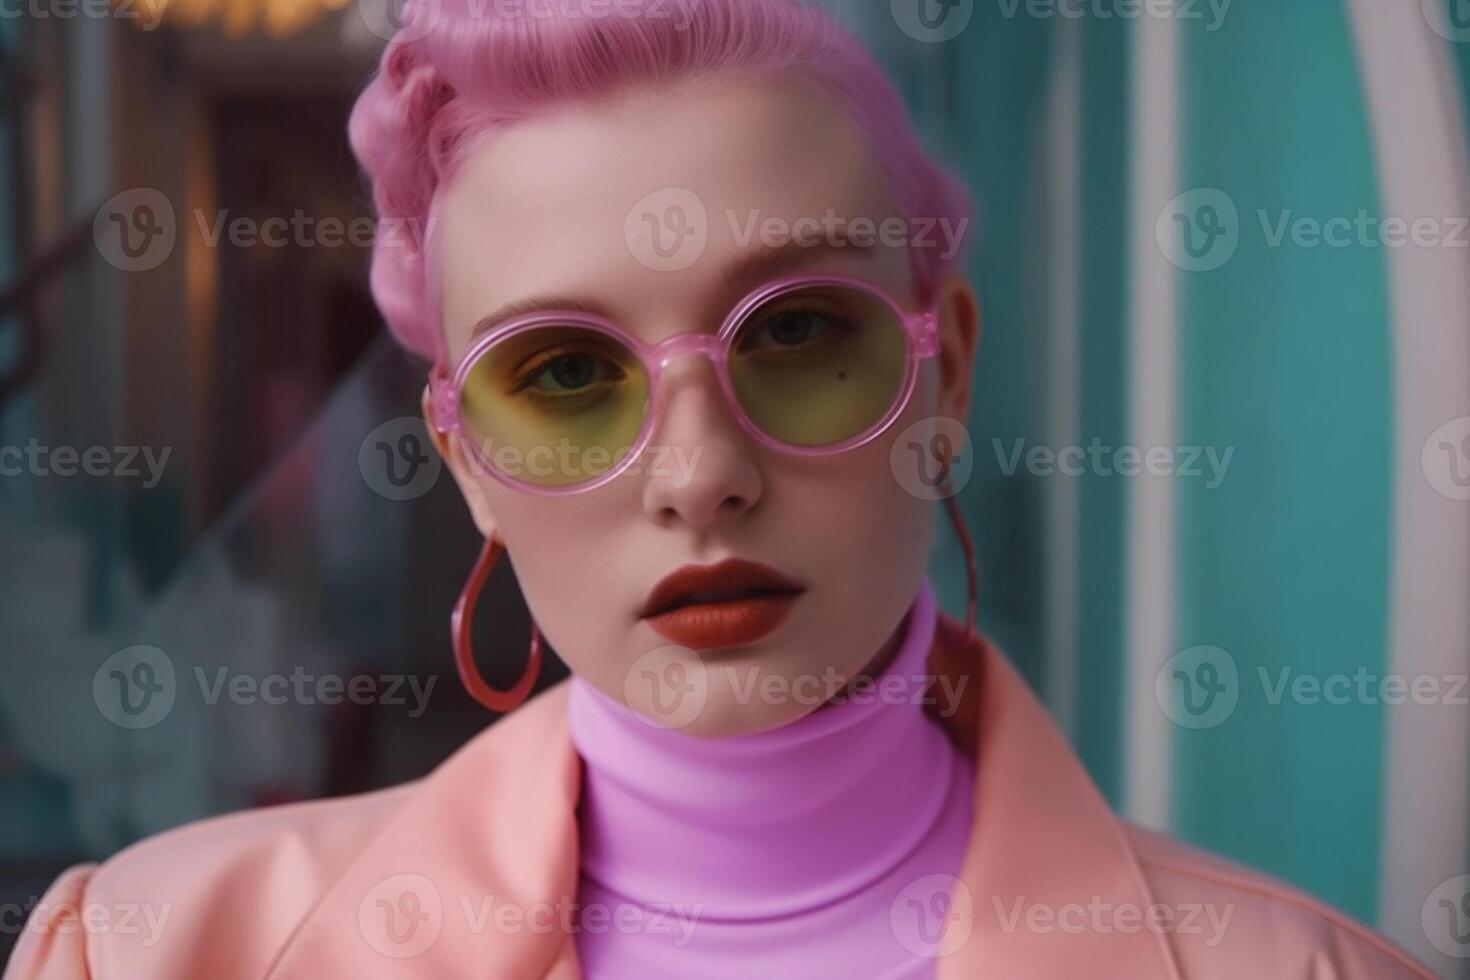 woman with pink glasses and outfit photo